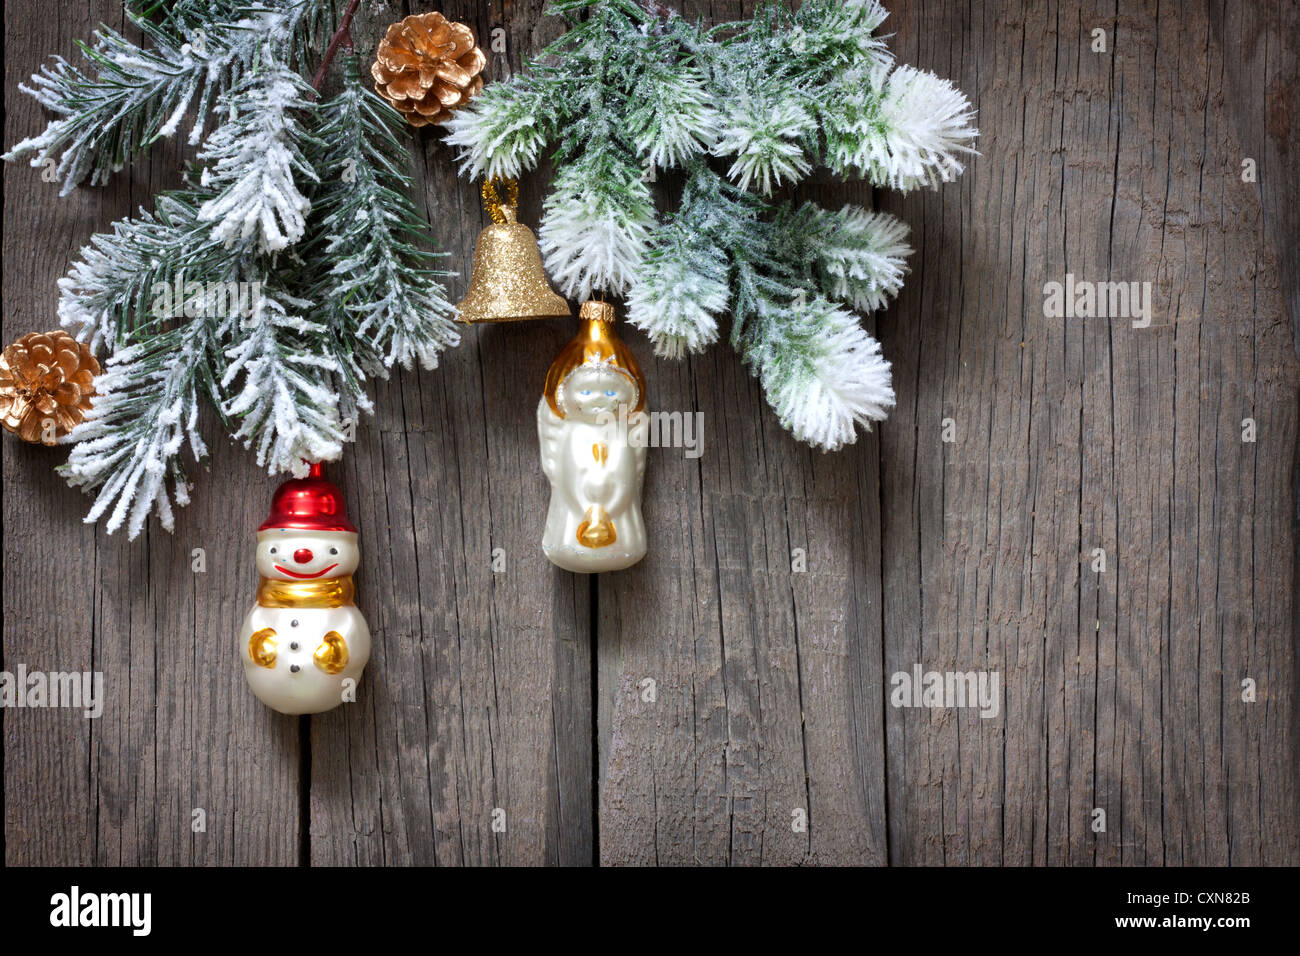 Christmas tree baubles background on vintage wooden boards Stock Photo